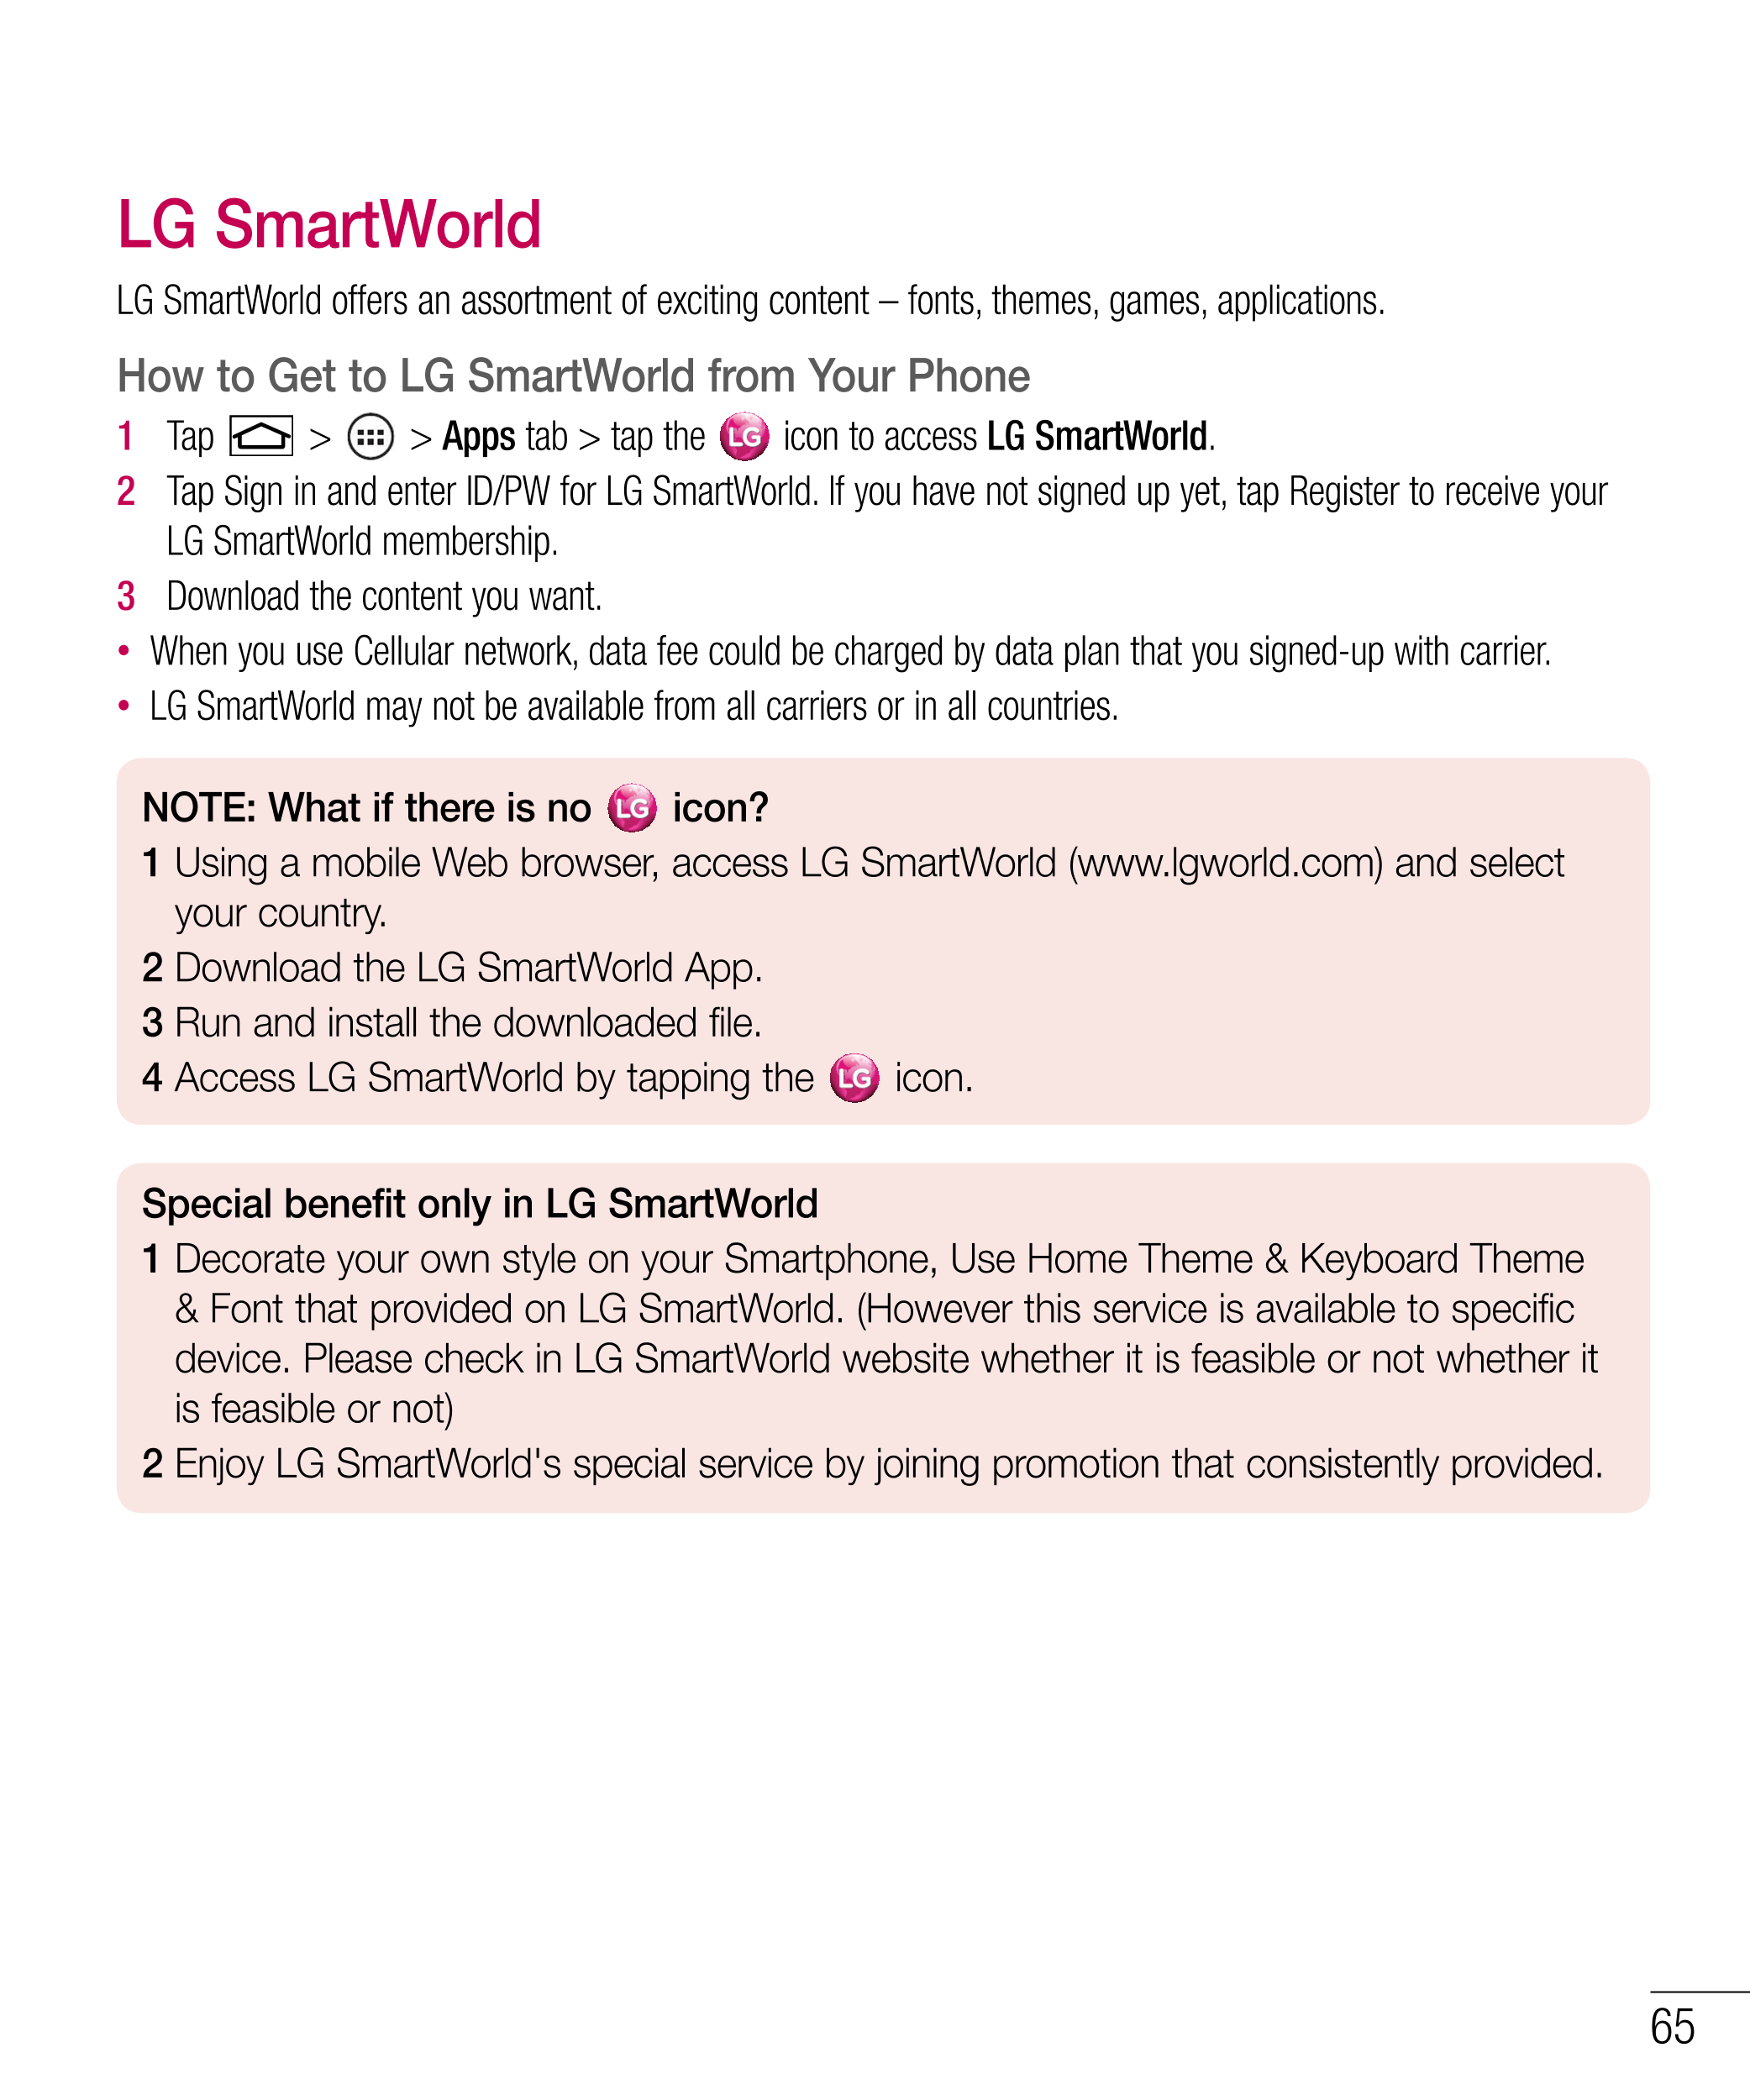 LG SmartWorld
LG SmartWorld offers an assortment of exciting content – fonts, themes, games, applications.
How to Get to LG Smar